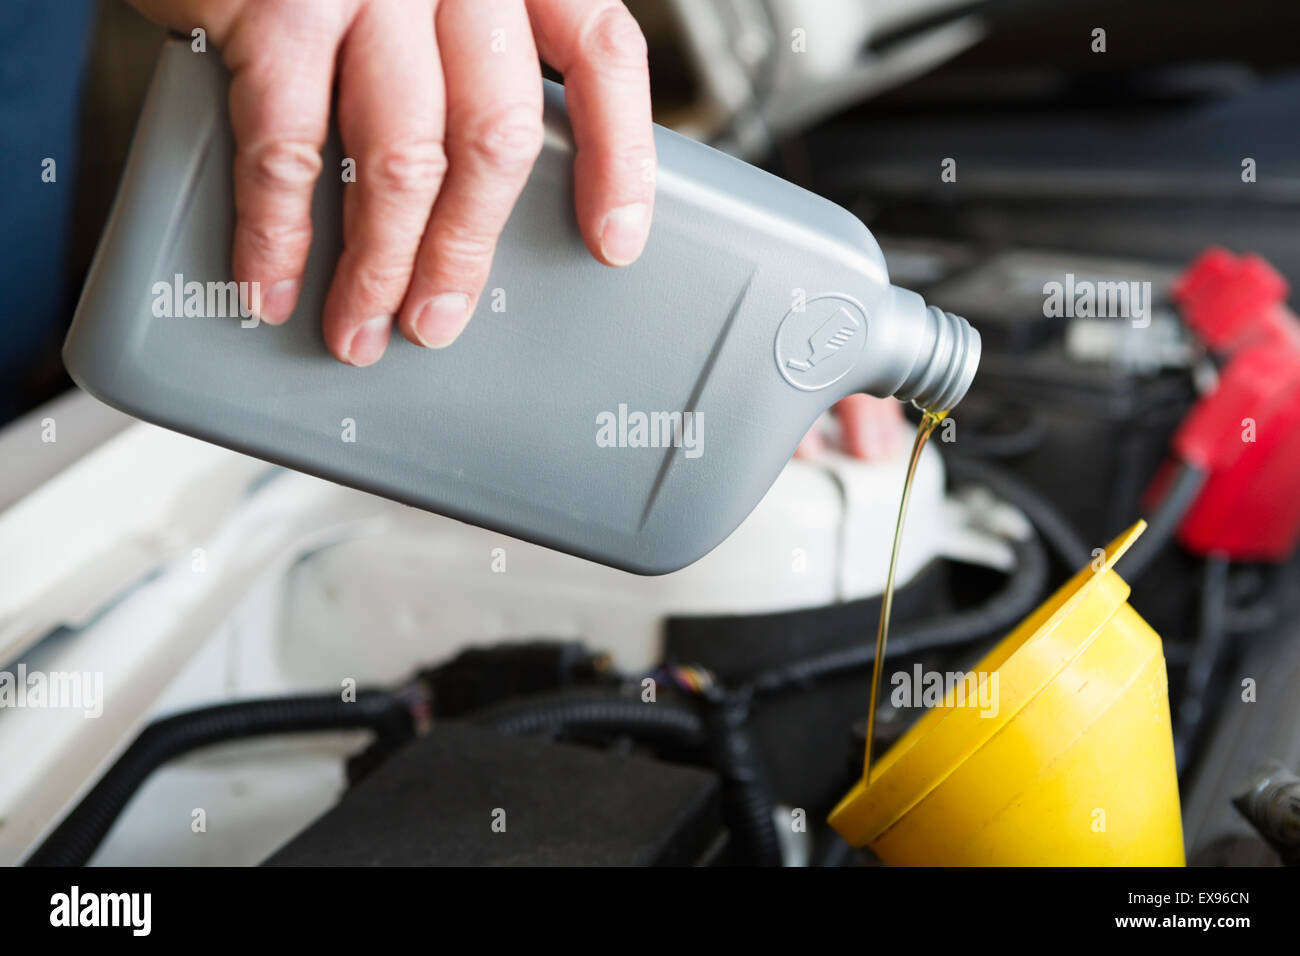 Man pouring car oil from plastic bottle Stock Photo